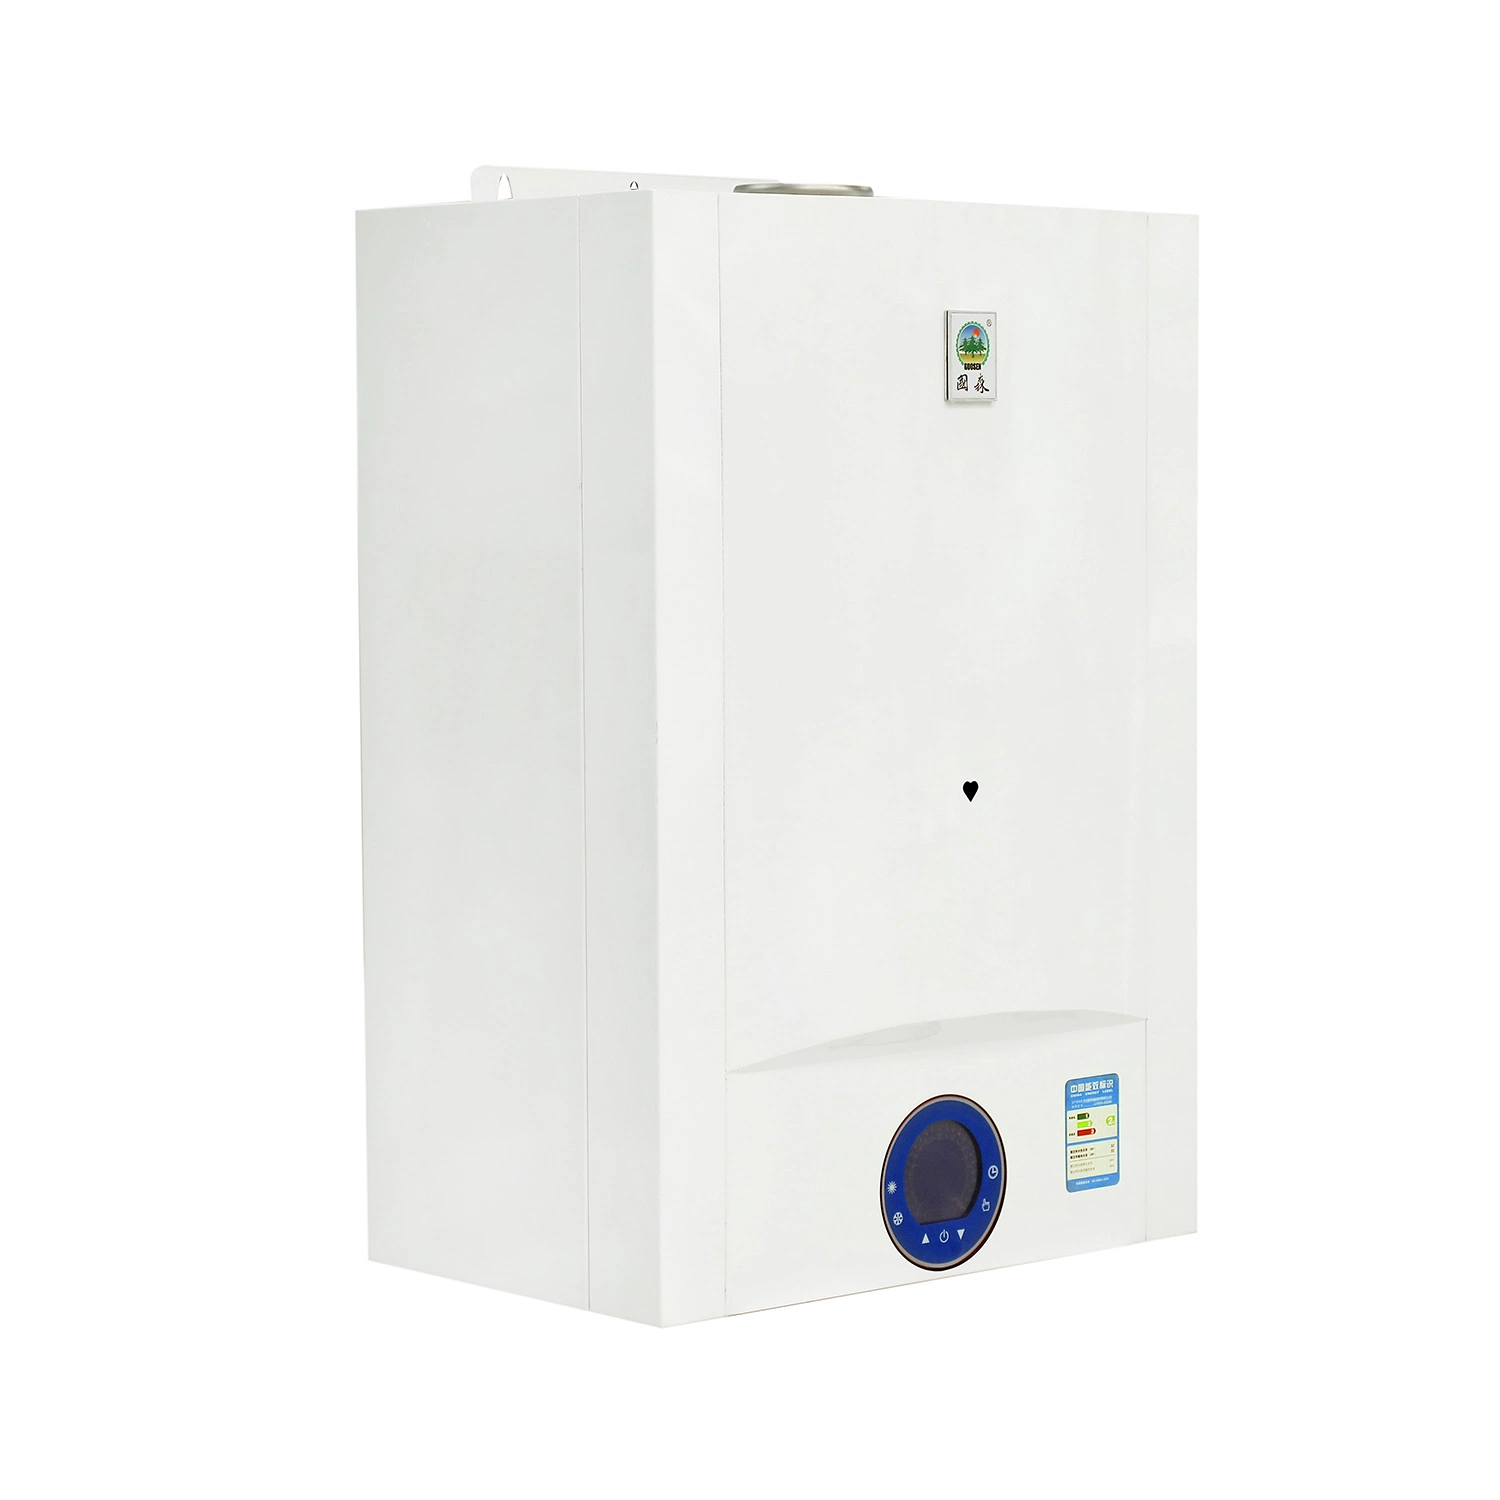 15.4kg/Min Household Fully Premixed Condensing Wall-Hung Gas Boilers for Heating and Domestic Hot Water